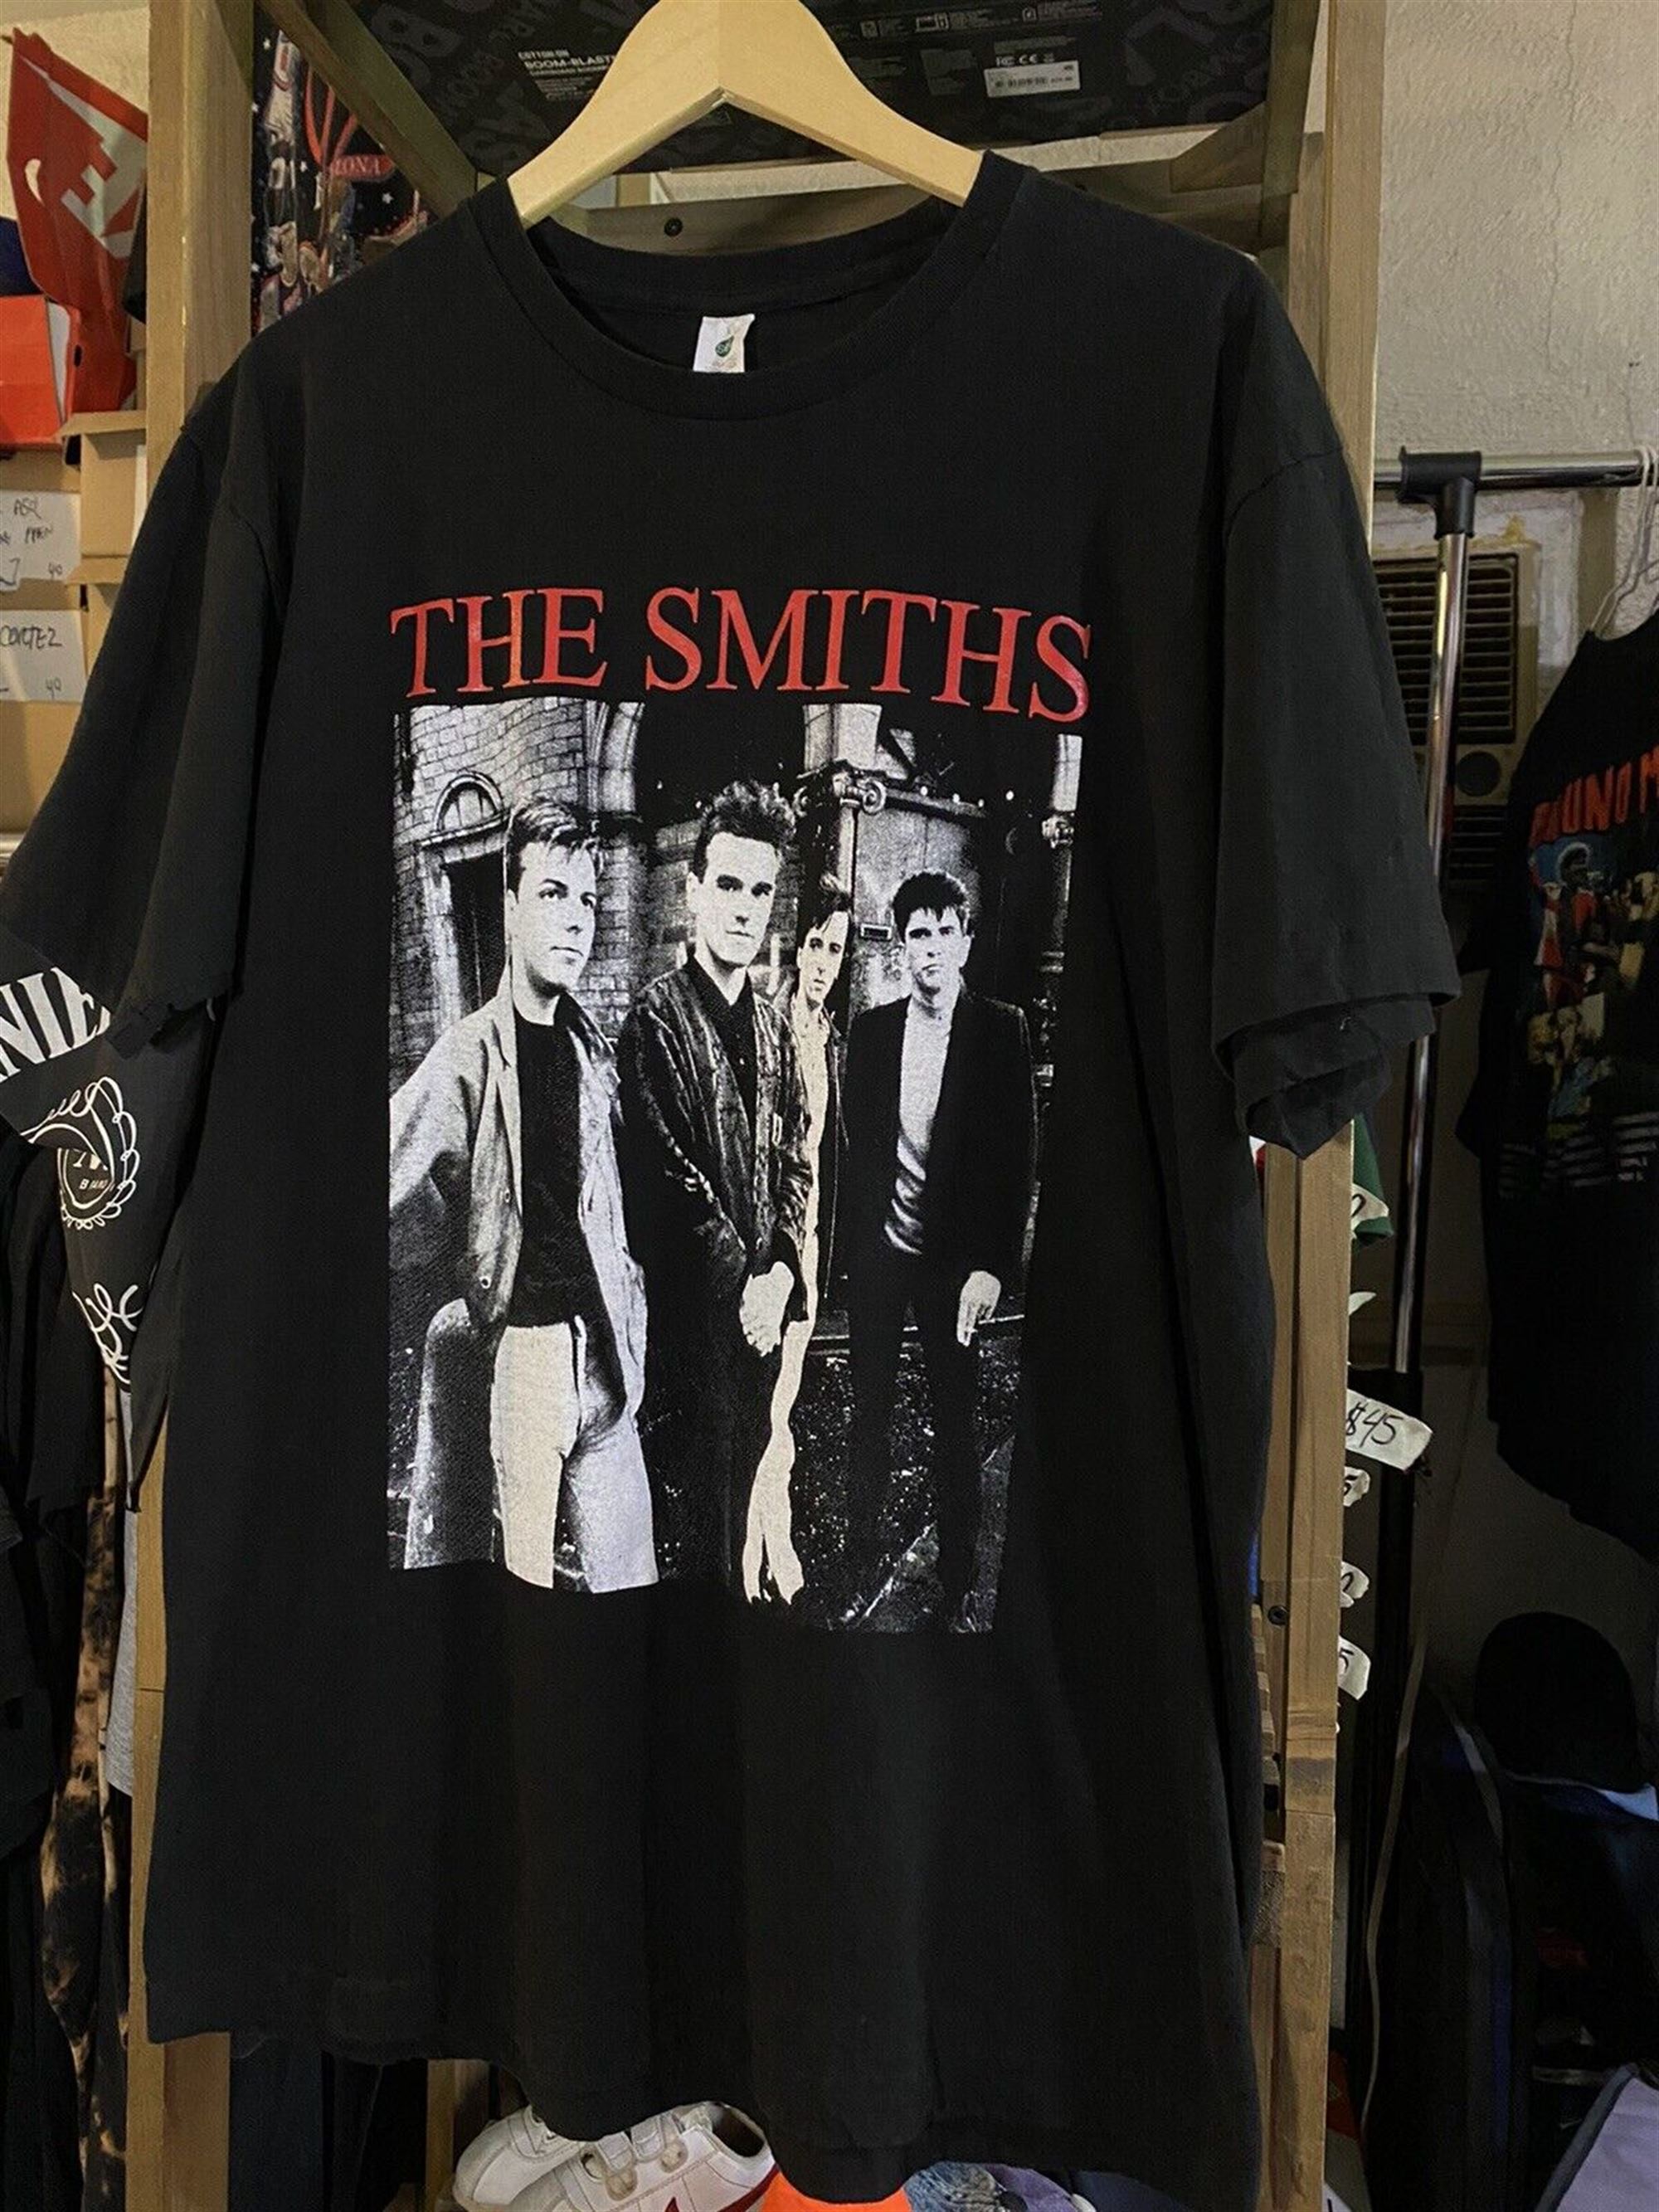 The Smiths Rock Band Vintage Style Black T-shirt Graphic Reprint Vintage 90s The Smiths T Shirt The Smiths Rock Band Tour Concert Shirt